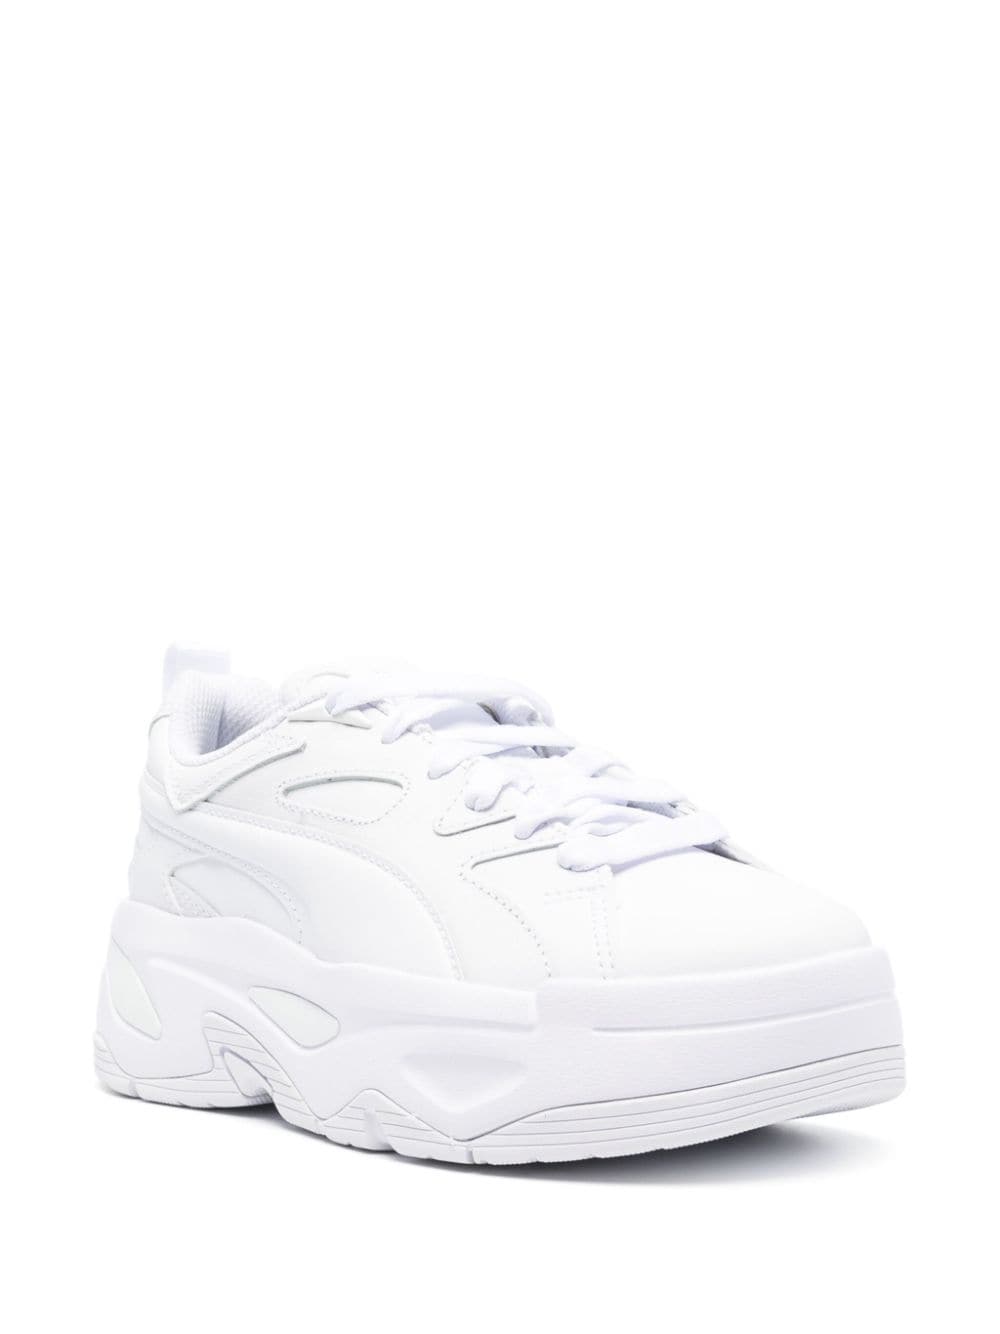 Image 2 of PUMA BLSTR Dresscode leather sneakers